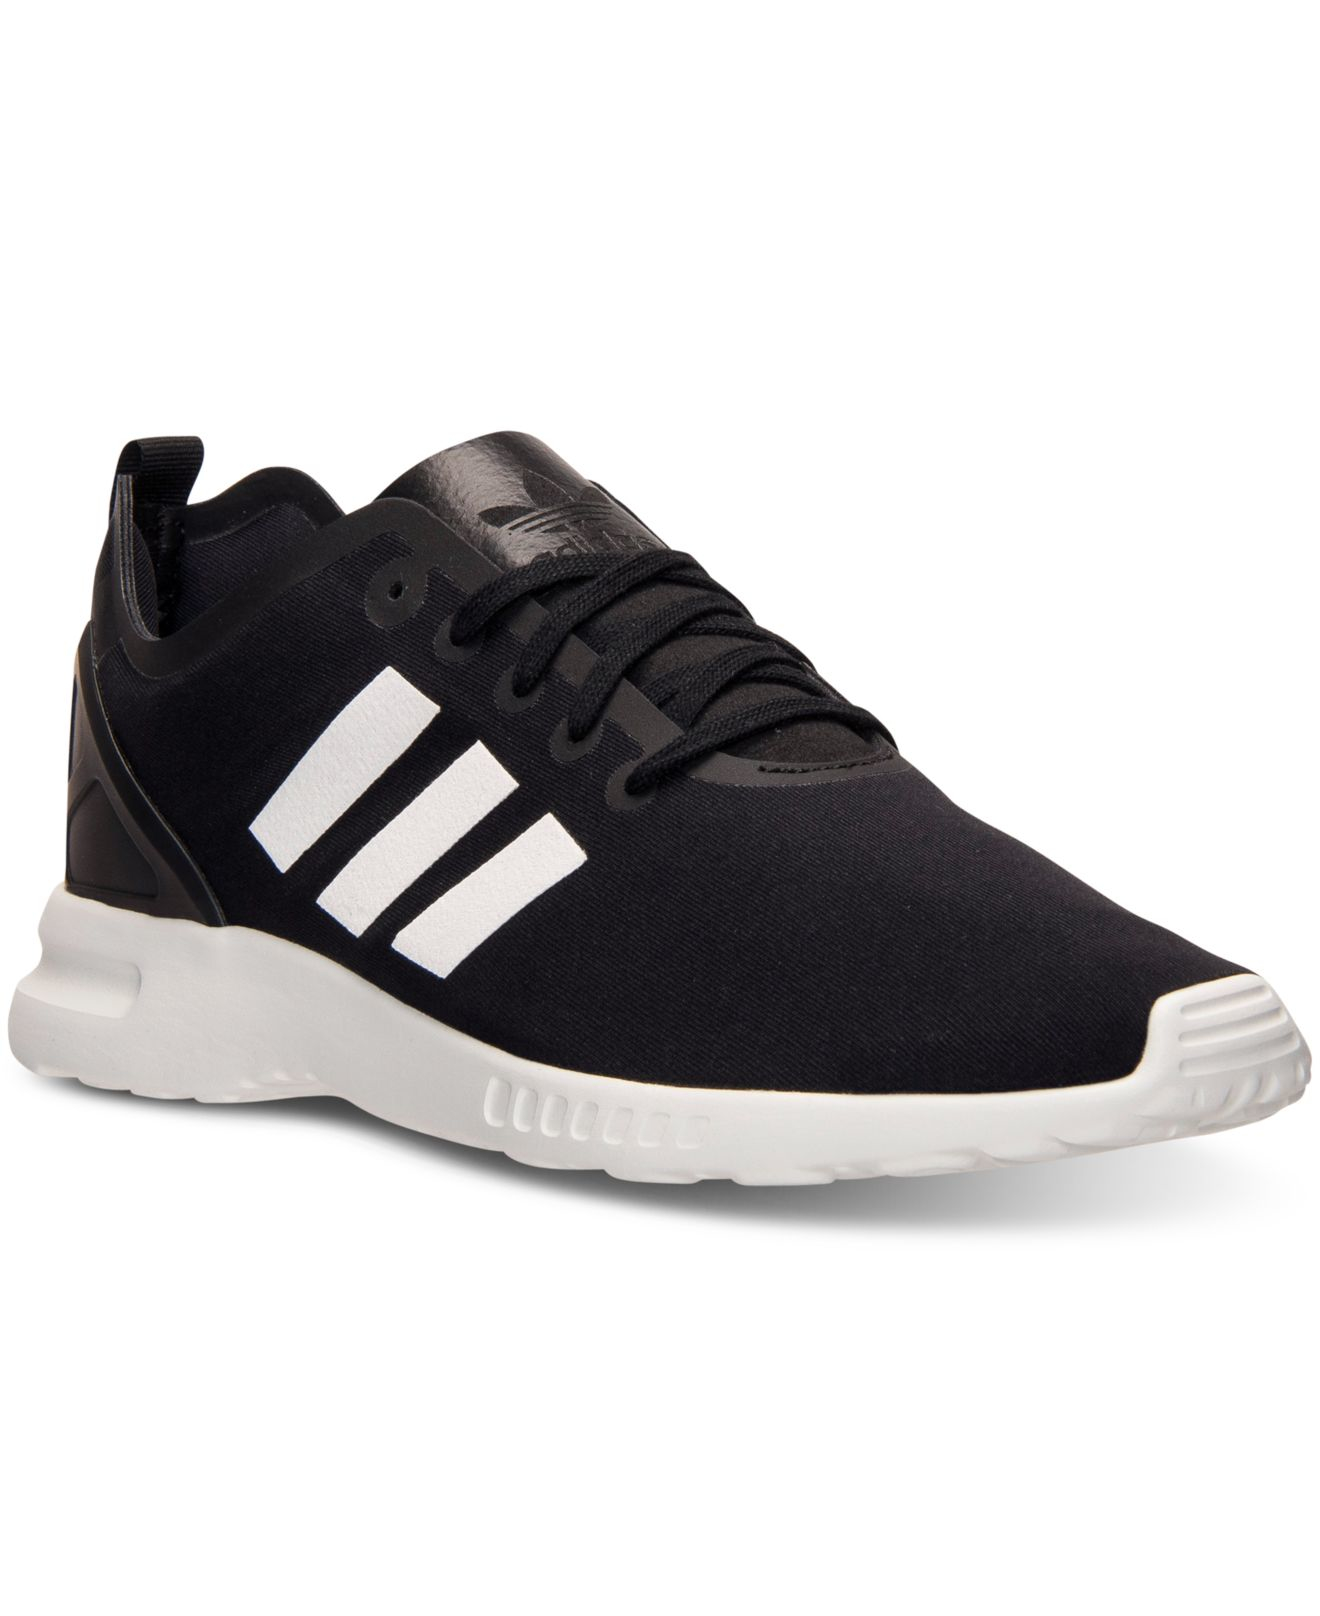 Adidas Women'S Zx Flux Smooth Running Sneakers From Finish Line in